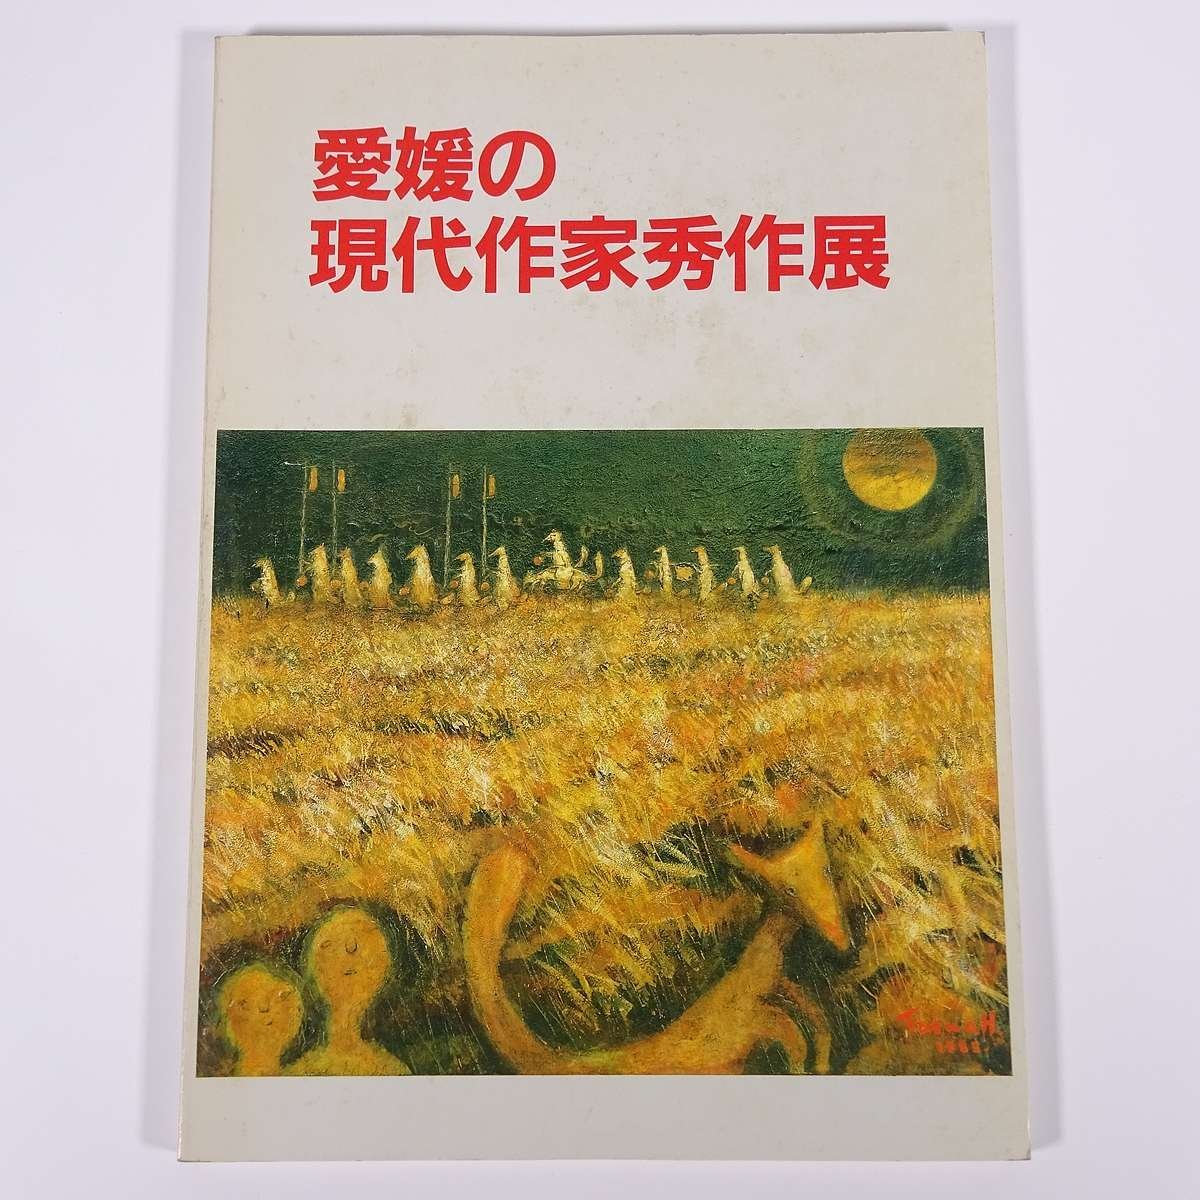 Exhibition of masterpieces by contemporary artists from Ehime, Matsuyama, Ehime Prefecture, Iyotetsu Sogo, Ehime Shimbun, 1983, large-format books, exhibitions, illustrations, catalogs, art, fine arts, paintings, crafts, sculptures, etc., Painting, Art Book, Collection, Catalog